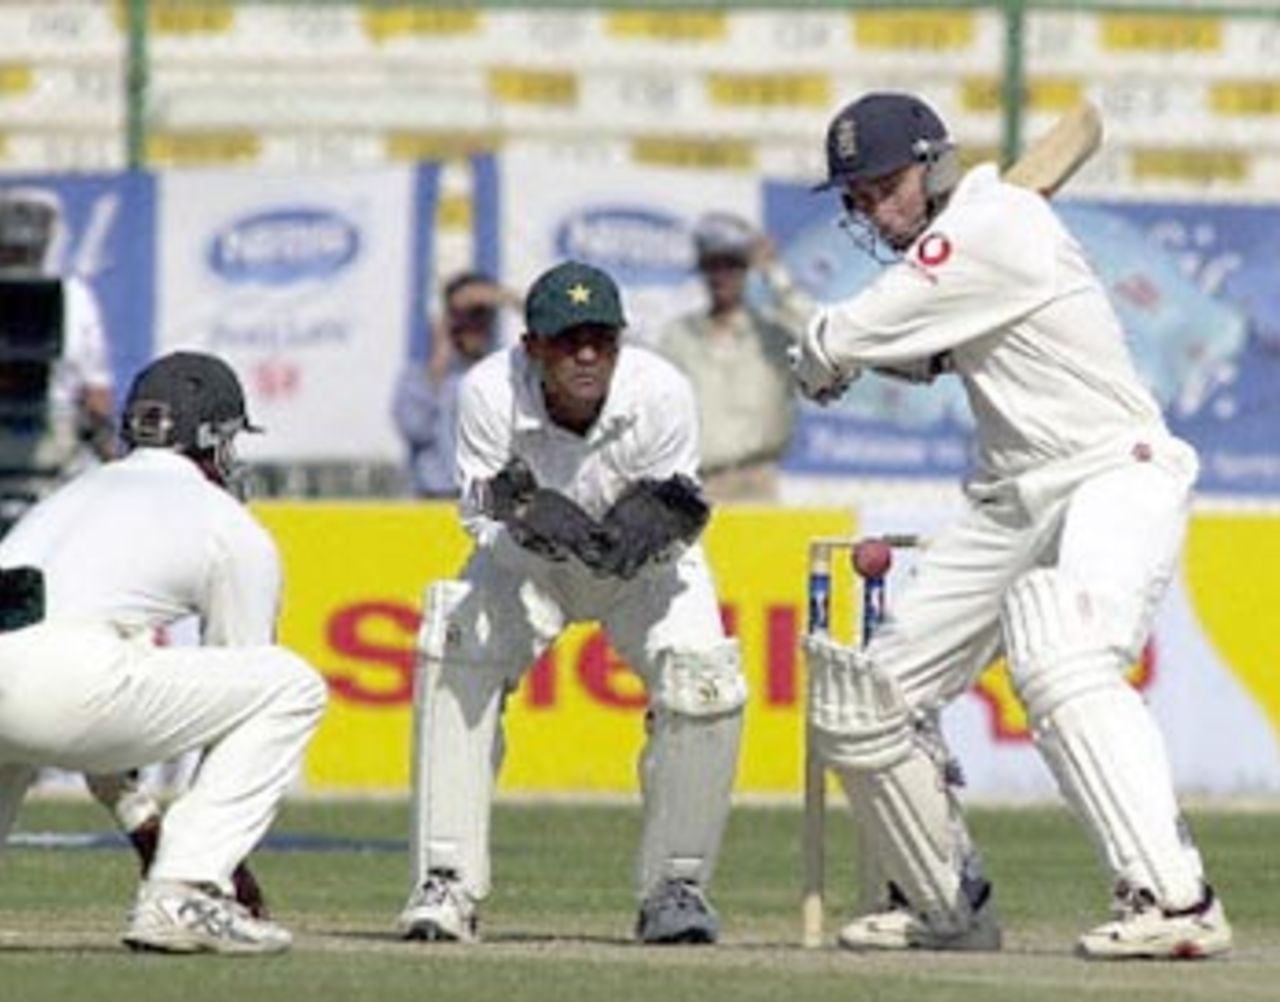 England opener Michael Atherton (R) plays a defensive push off a Pakistani spinner as wicketkeeper Moin Khan (C) and fielder Yousuf Youhanna (L) look on, during the third-day of the third and final Test at the National stadium in Karachi, 09 December 2000. Atherton was 76 not out as England reached 145-1 at lunch in reply to Pakistan's 405 in their first innings.